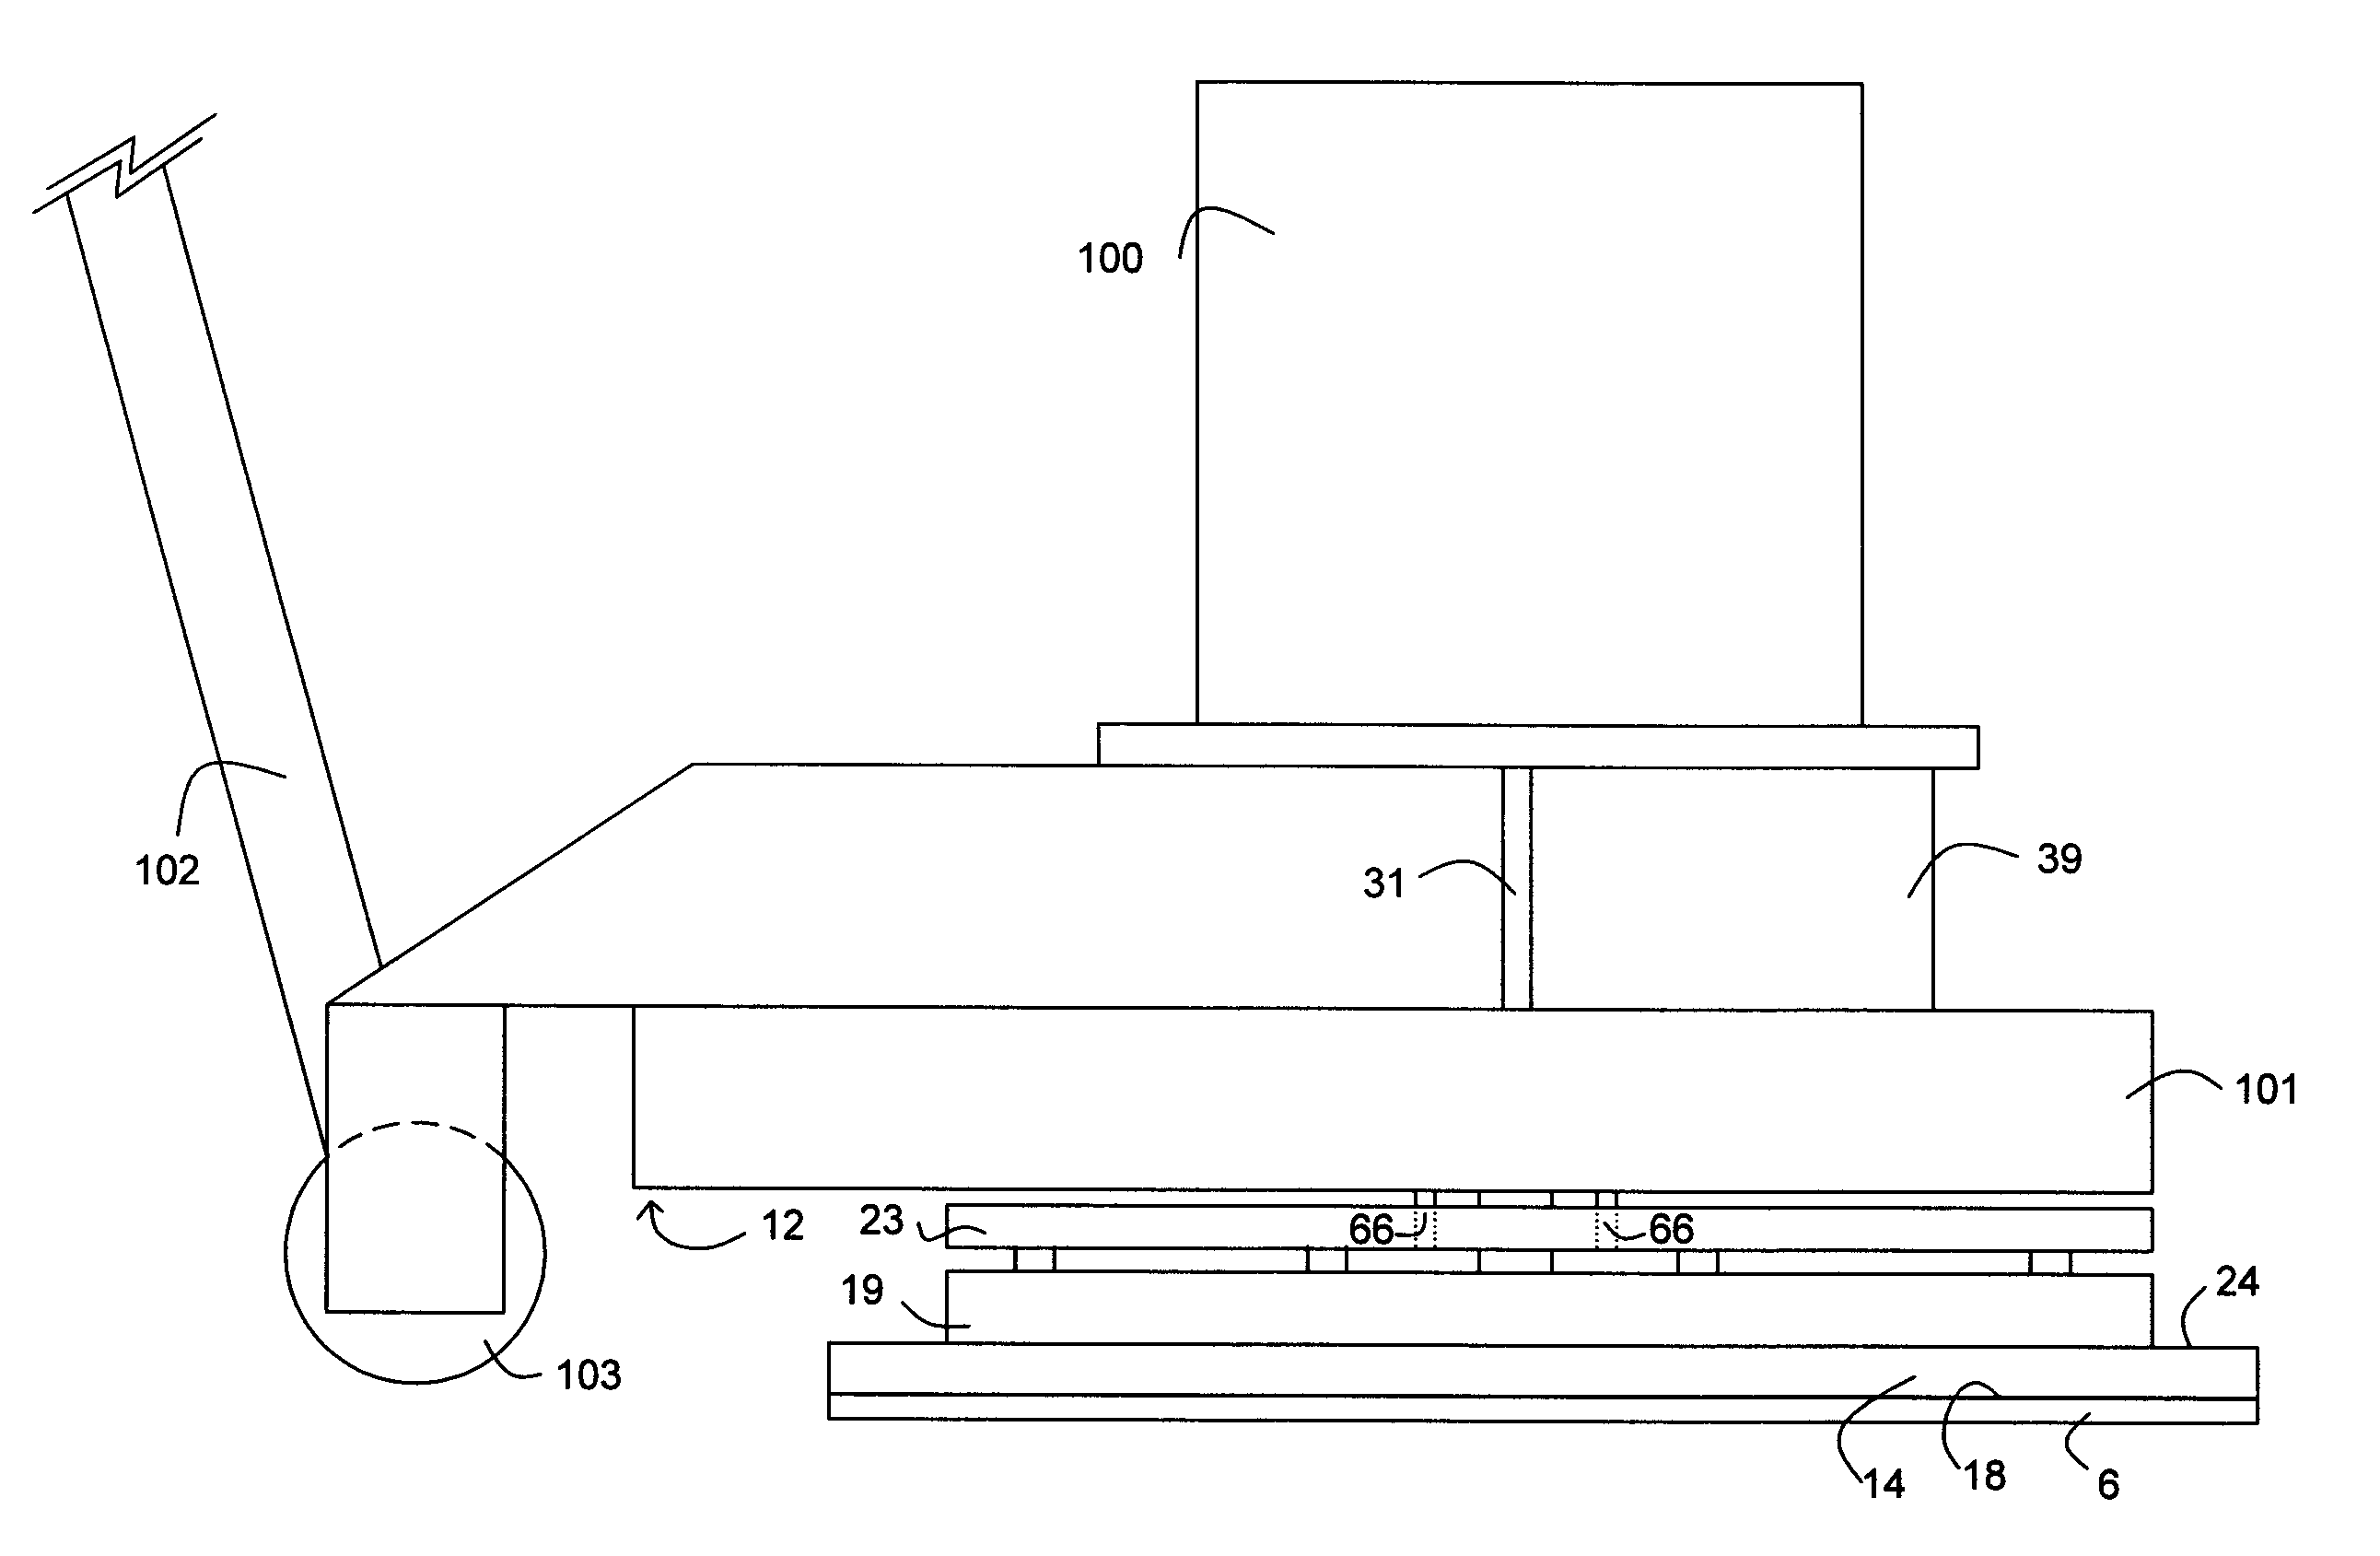 Apparatus for cleaning floor surfaces